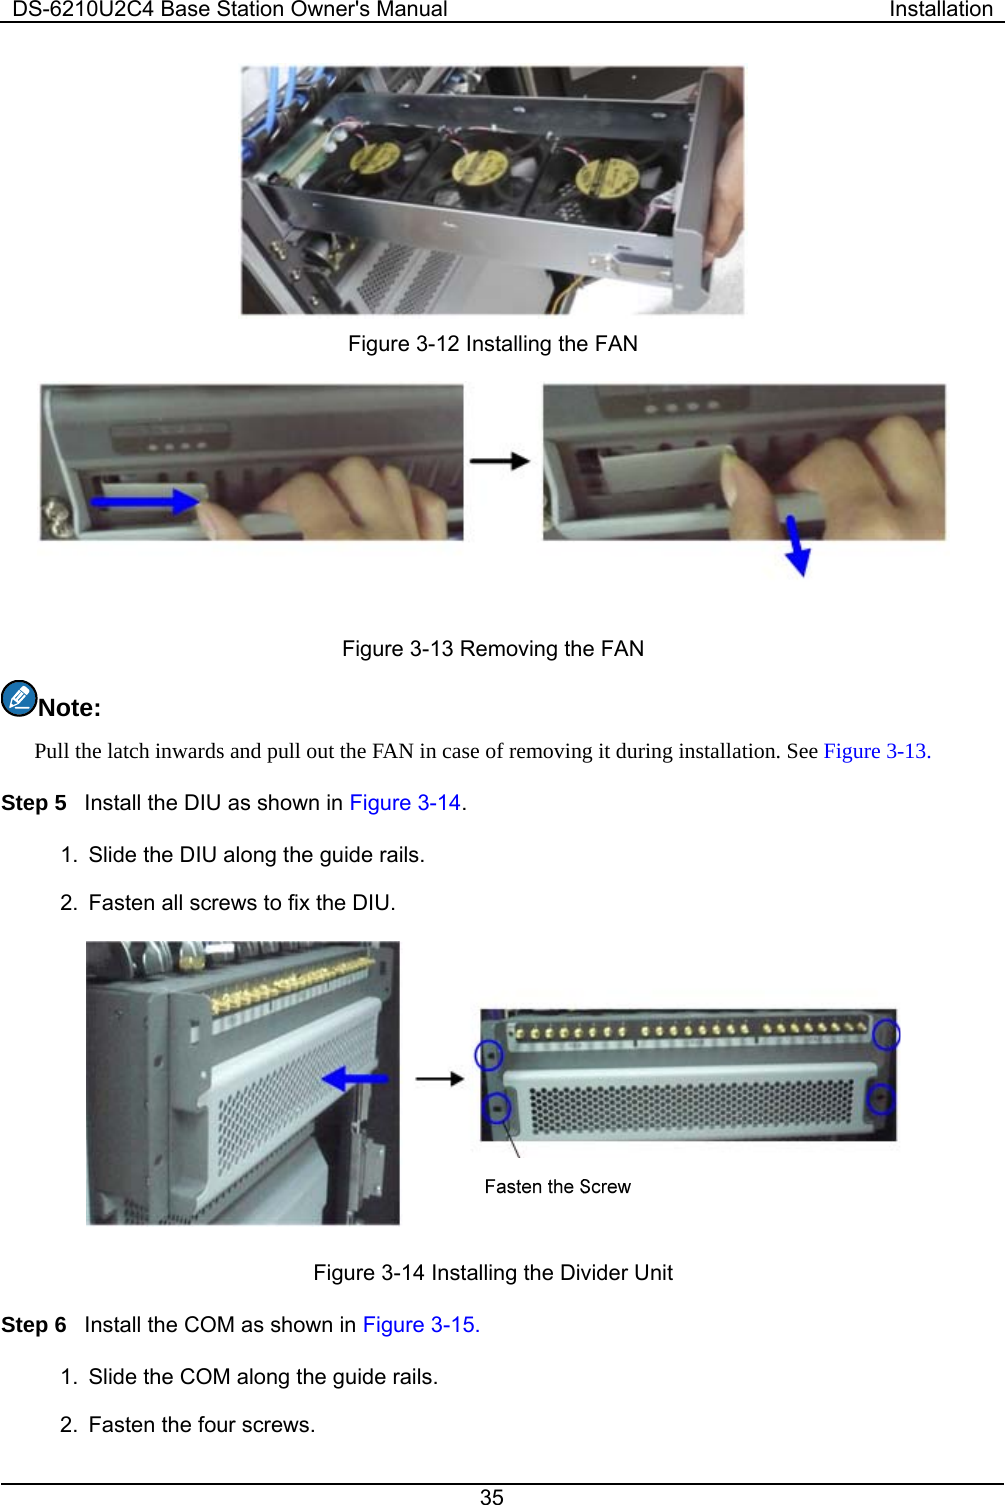 DS-6210U2C4 Base Station Owner&apos;s Manual  Installation 35   Figure 3-12 Installing the FAN  Figure 3-13 Removing the FAN Note:  Pull the latch inwards and pull out the FAN in case of removing it during installation. See Figure 3-13.   Step 5  Install the DIU as shown in Figure 3-14.  1.  Slide the DIU along the guide rails.   2.  Fasten all screws to fix the DIU.    Figure 3-14 Installing the Divider Unit Step 6  Install the COM as shown in Figure 3-15.   1.  Slide the COM along the guide rails.     2.  Fasten the four screws.   